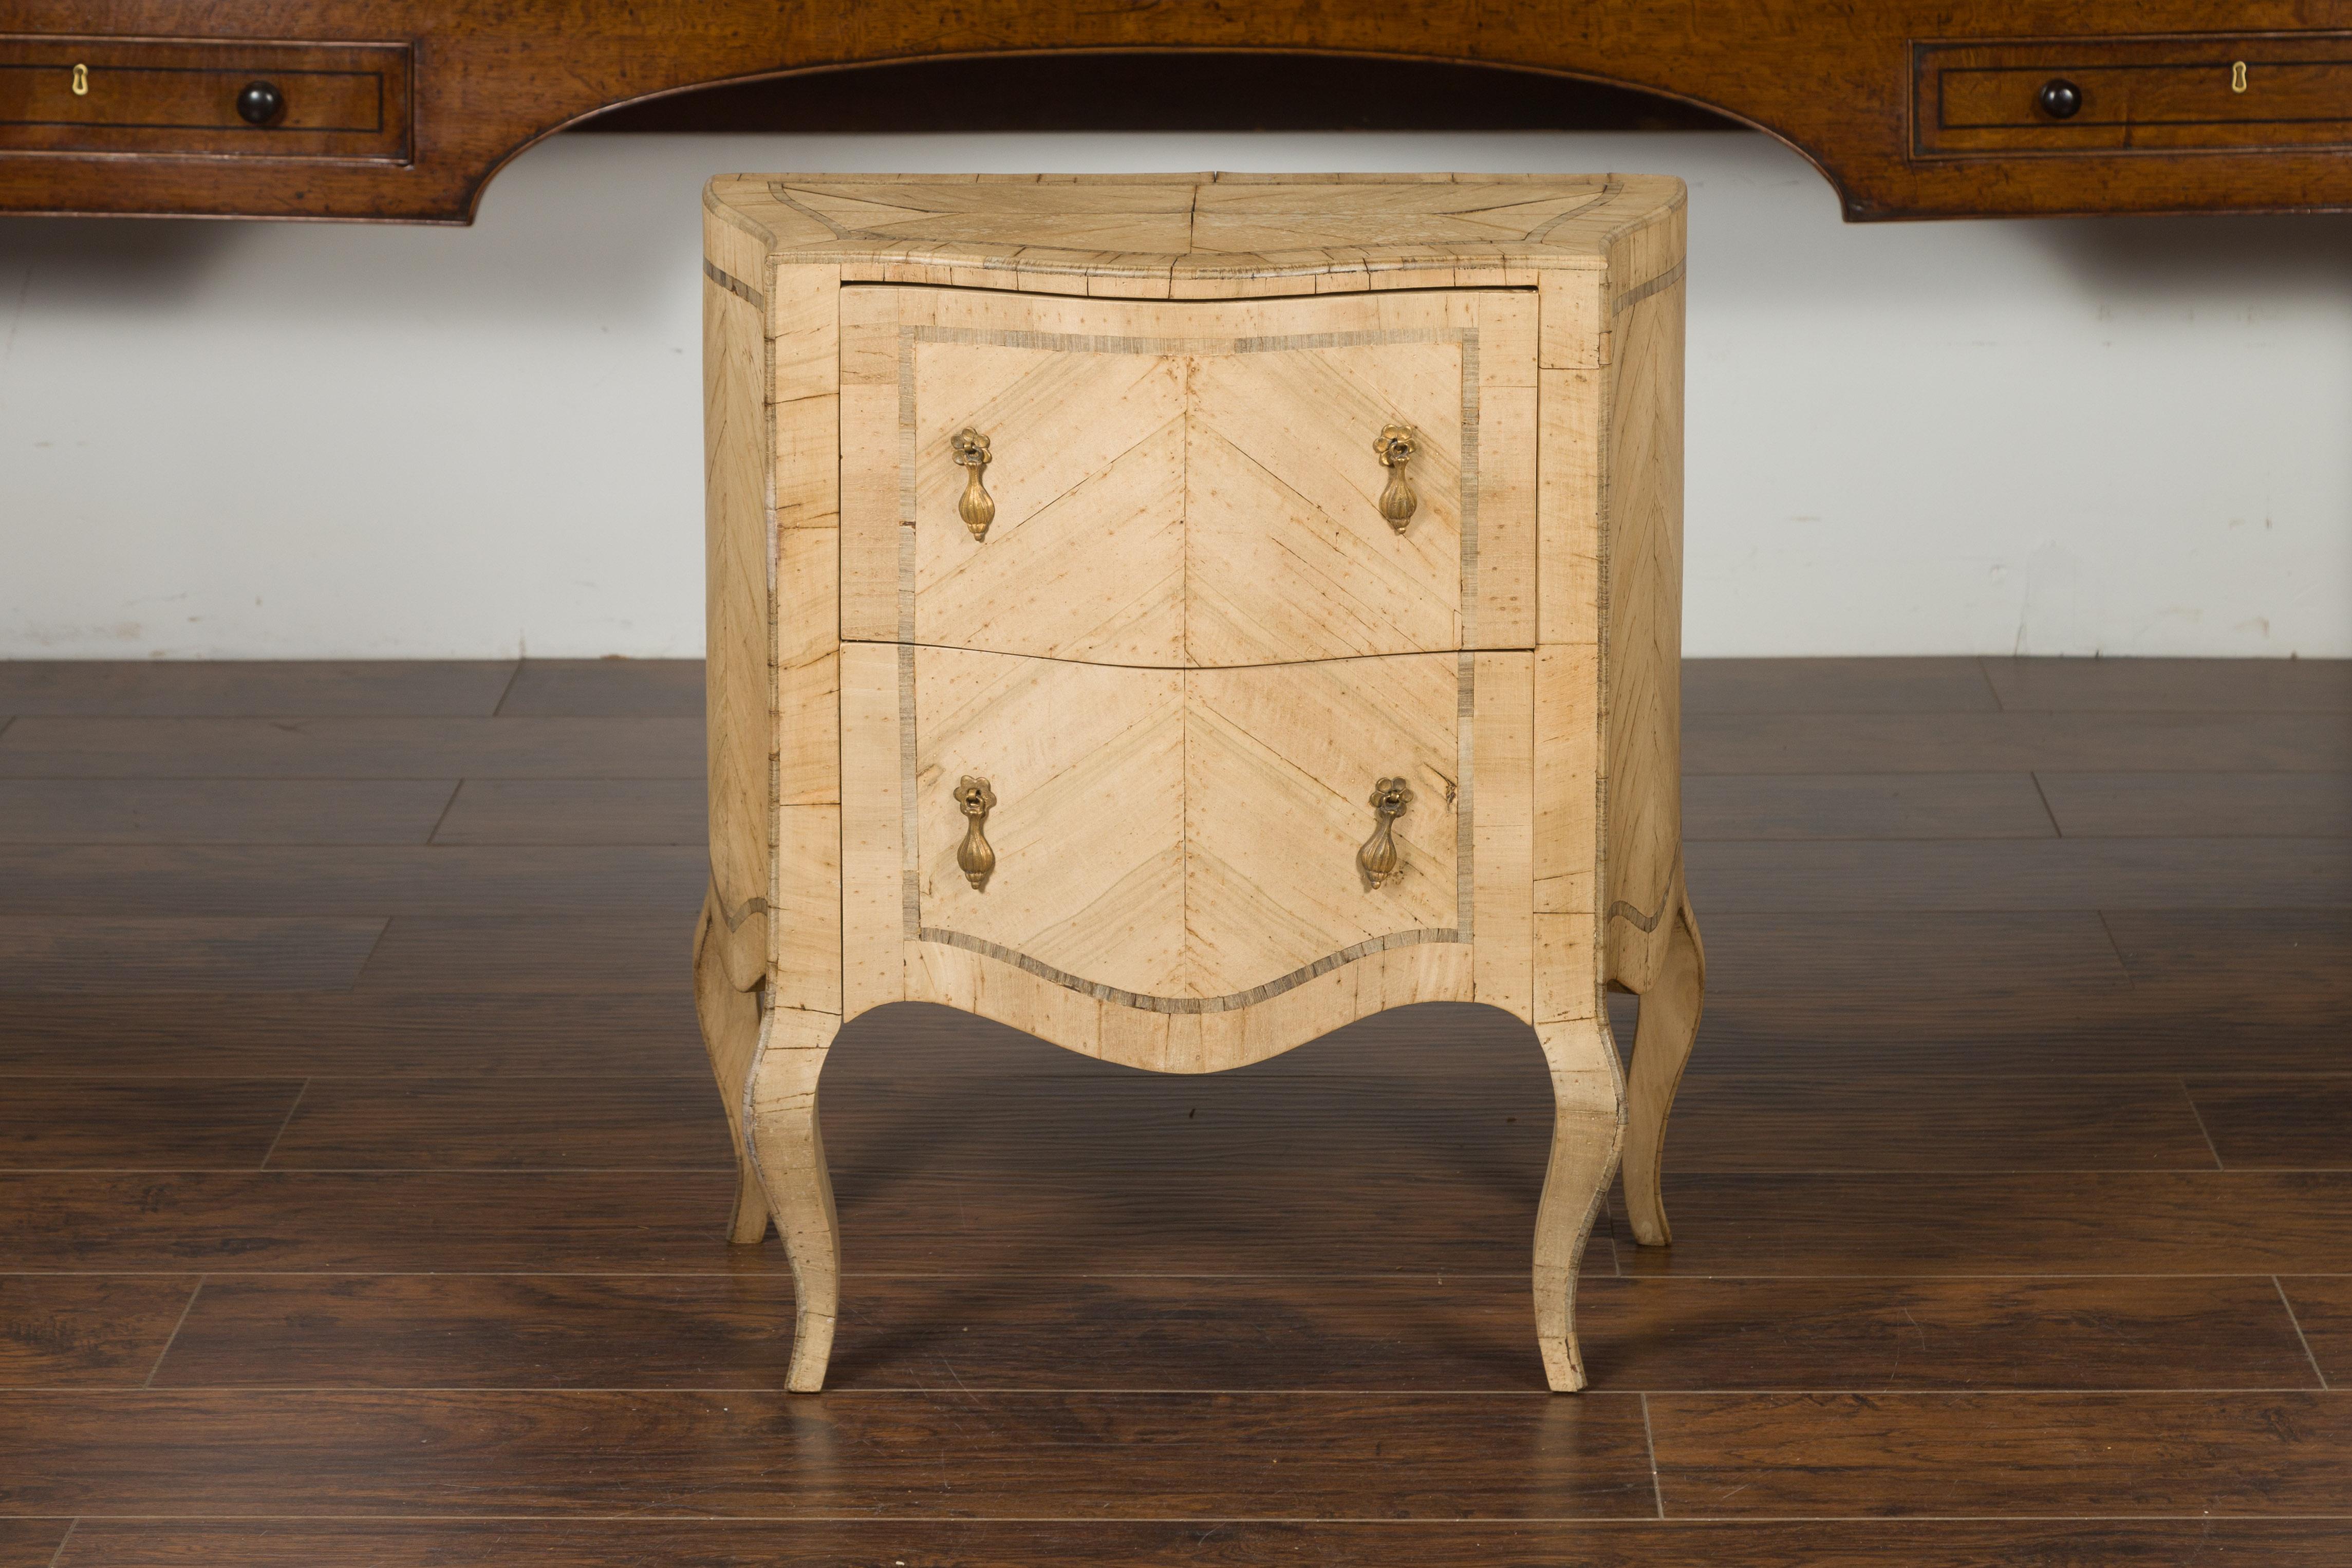 A petite Italian Rococo style walnut commode from the mid-20th century, with butterfly veneer, serpentine accents and cabriole legs. Create in Italy during the midcentury period, this Rococo style walnut commode features a shaped top sitting above